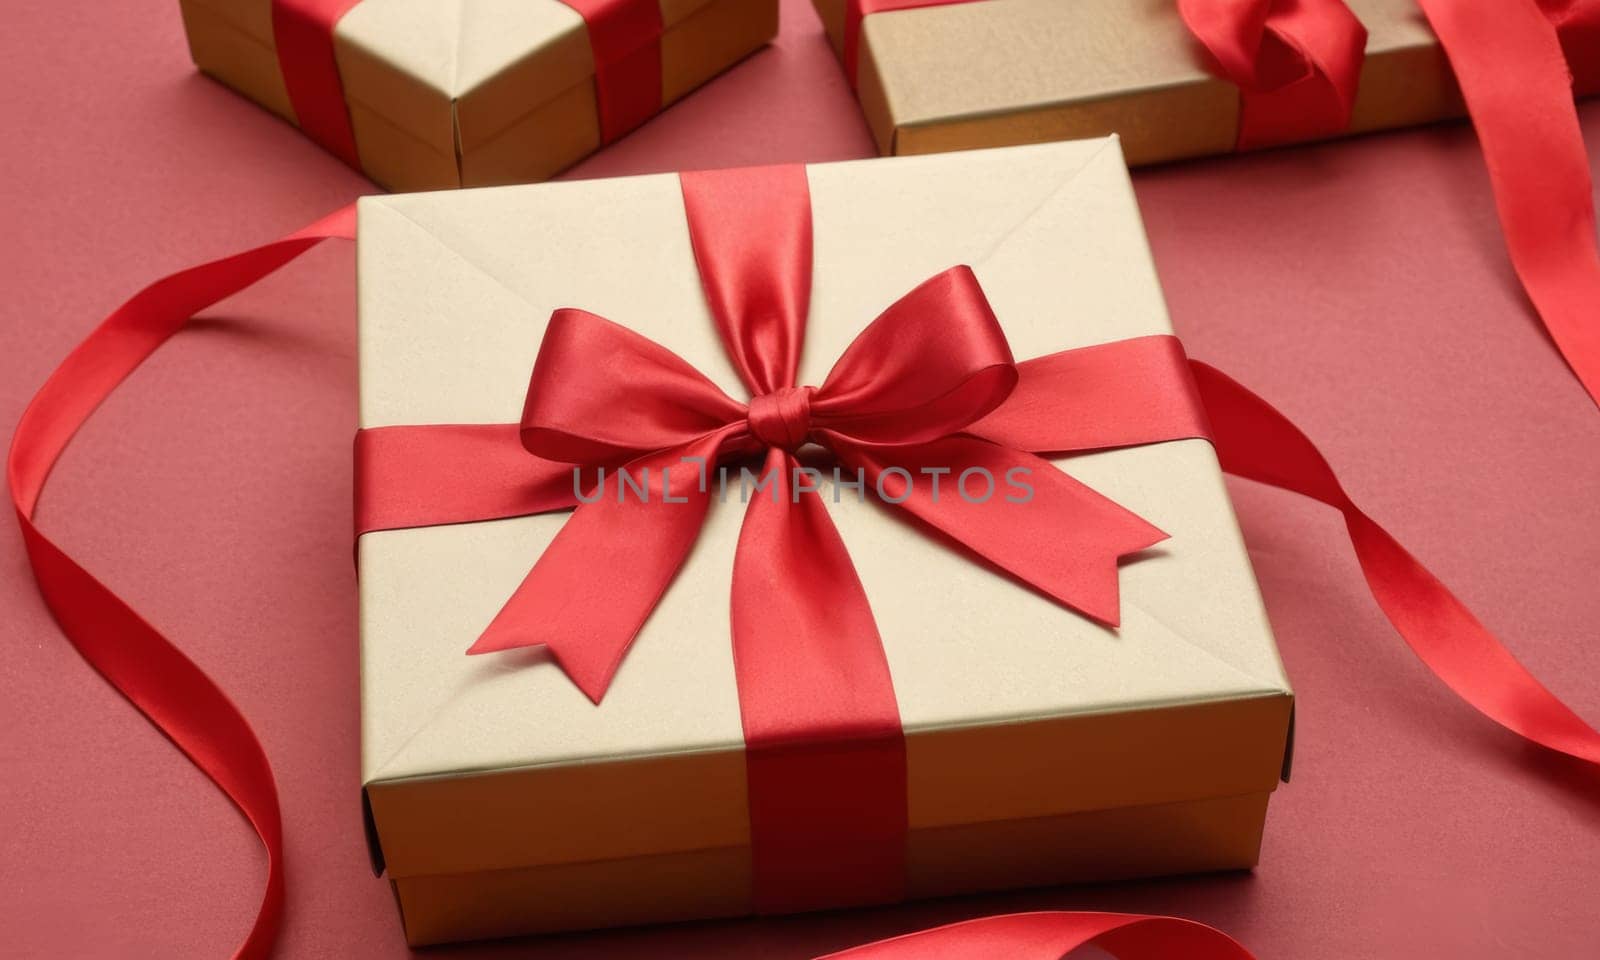 A beautifully wrapped gift adorned with a vibrant red bow sits elegantly against a backdrop of more presents and festive decorations. The scene captures the spirit of giving and the joy of the holiday season.